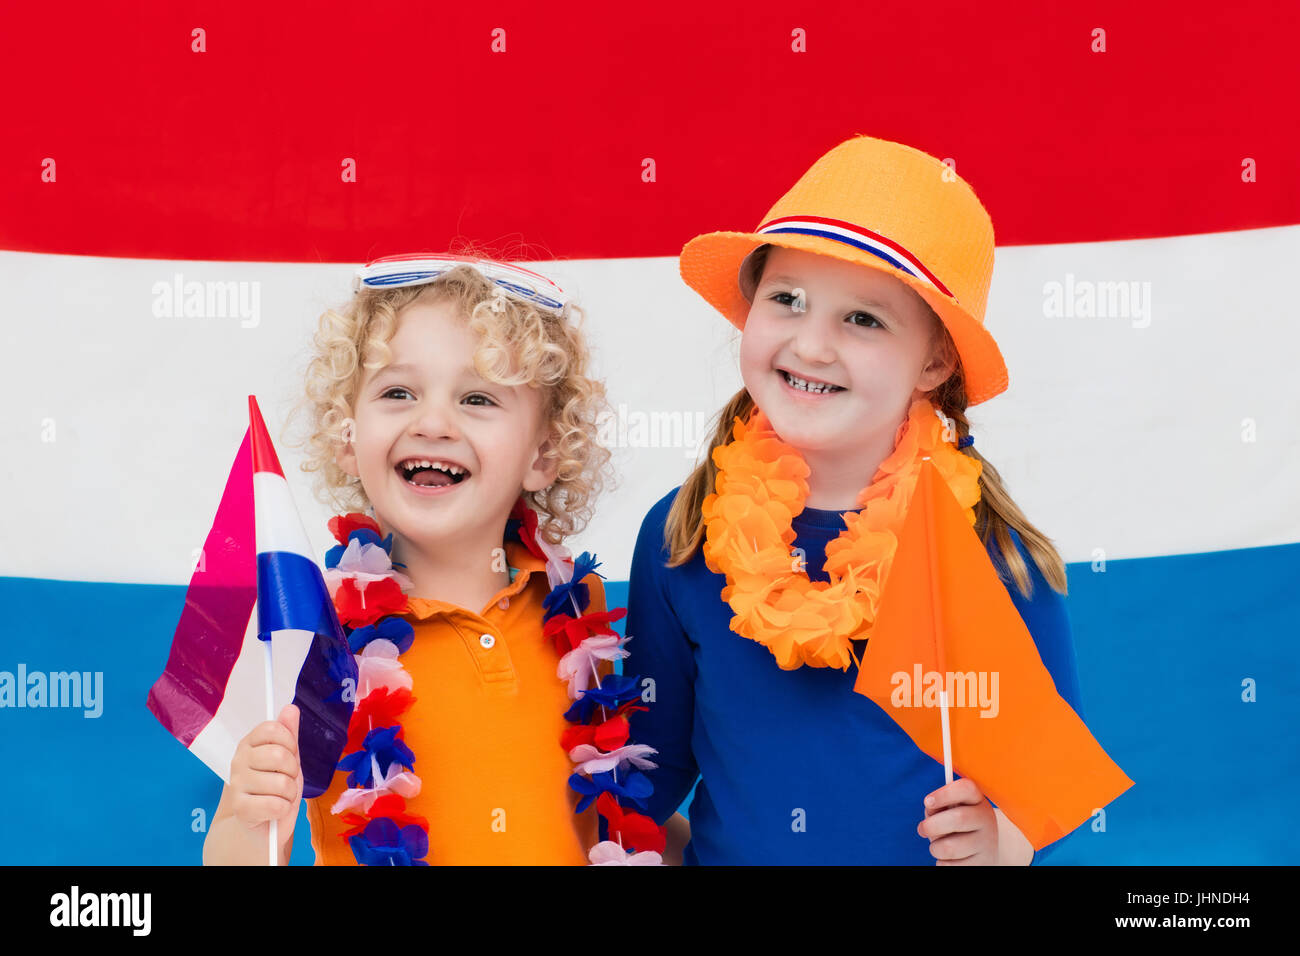 Little Dutch boy and girl wearing country symbols celebrating King day ...